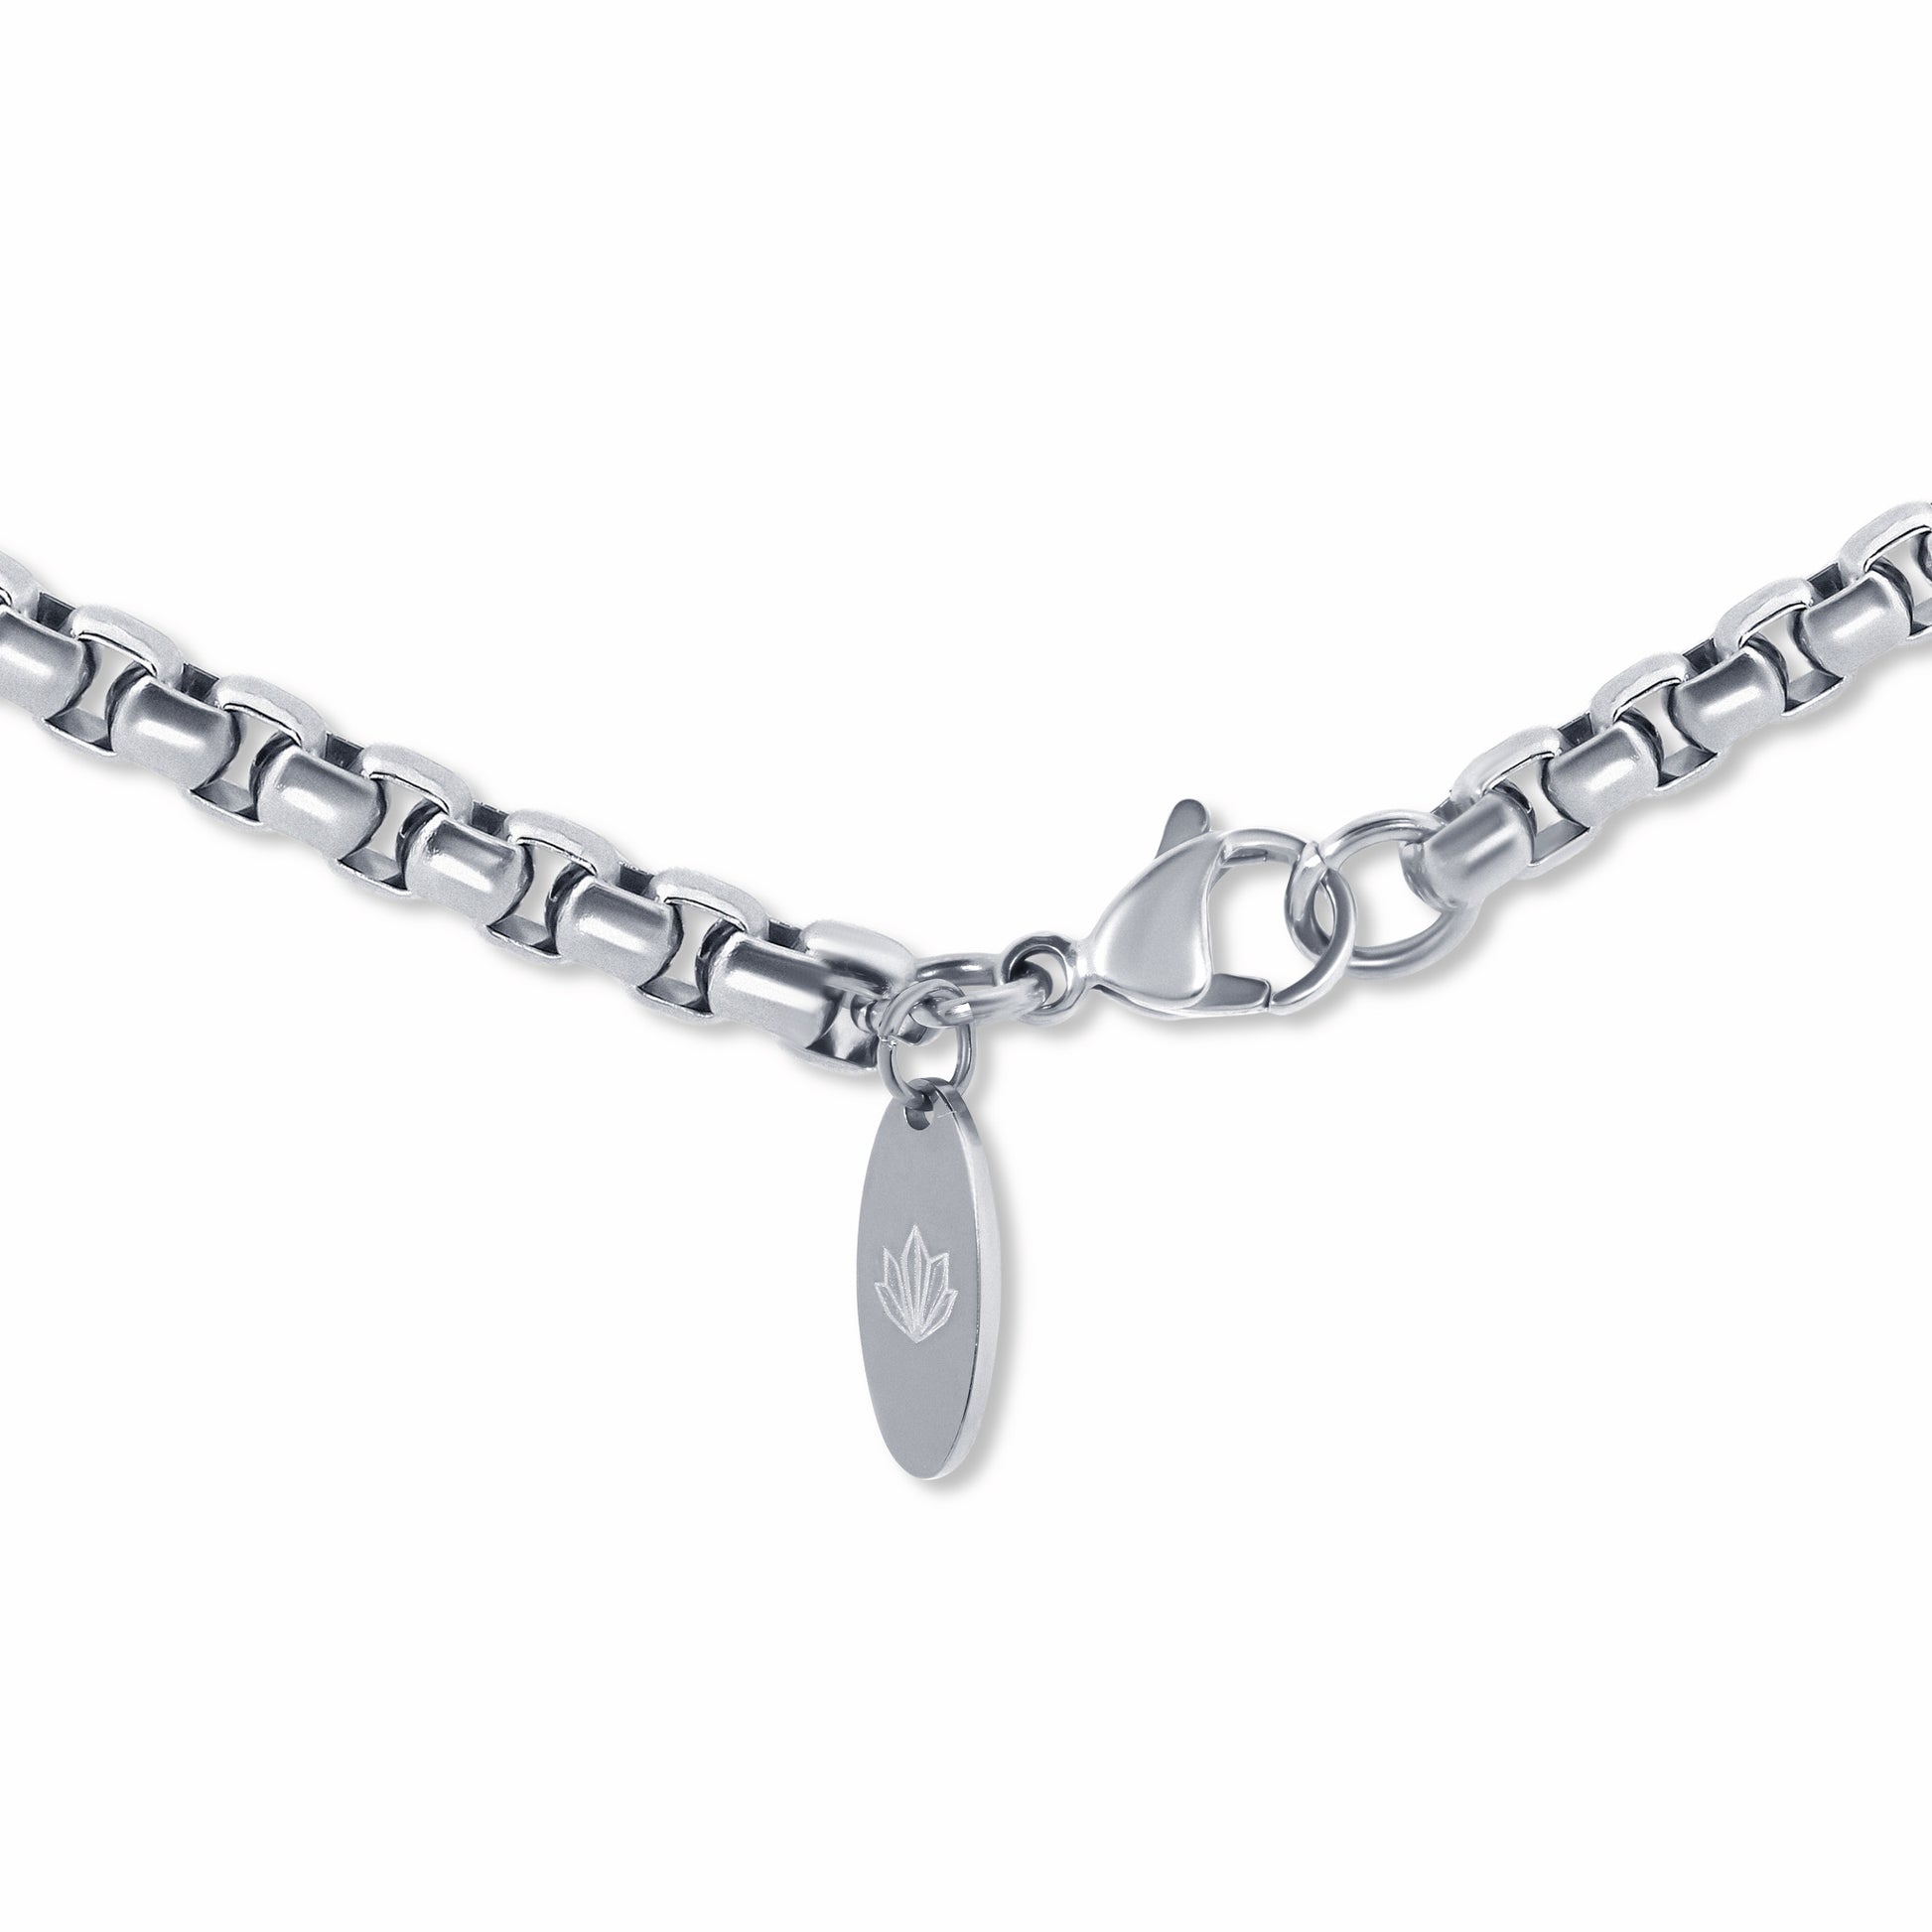 Round Box Link Chain Silver 5mm clasp with engraved logo tag on a white background